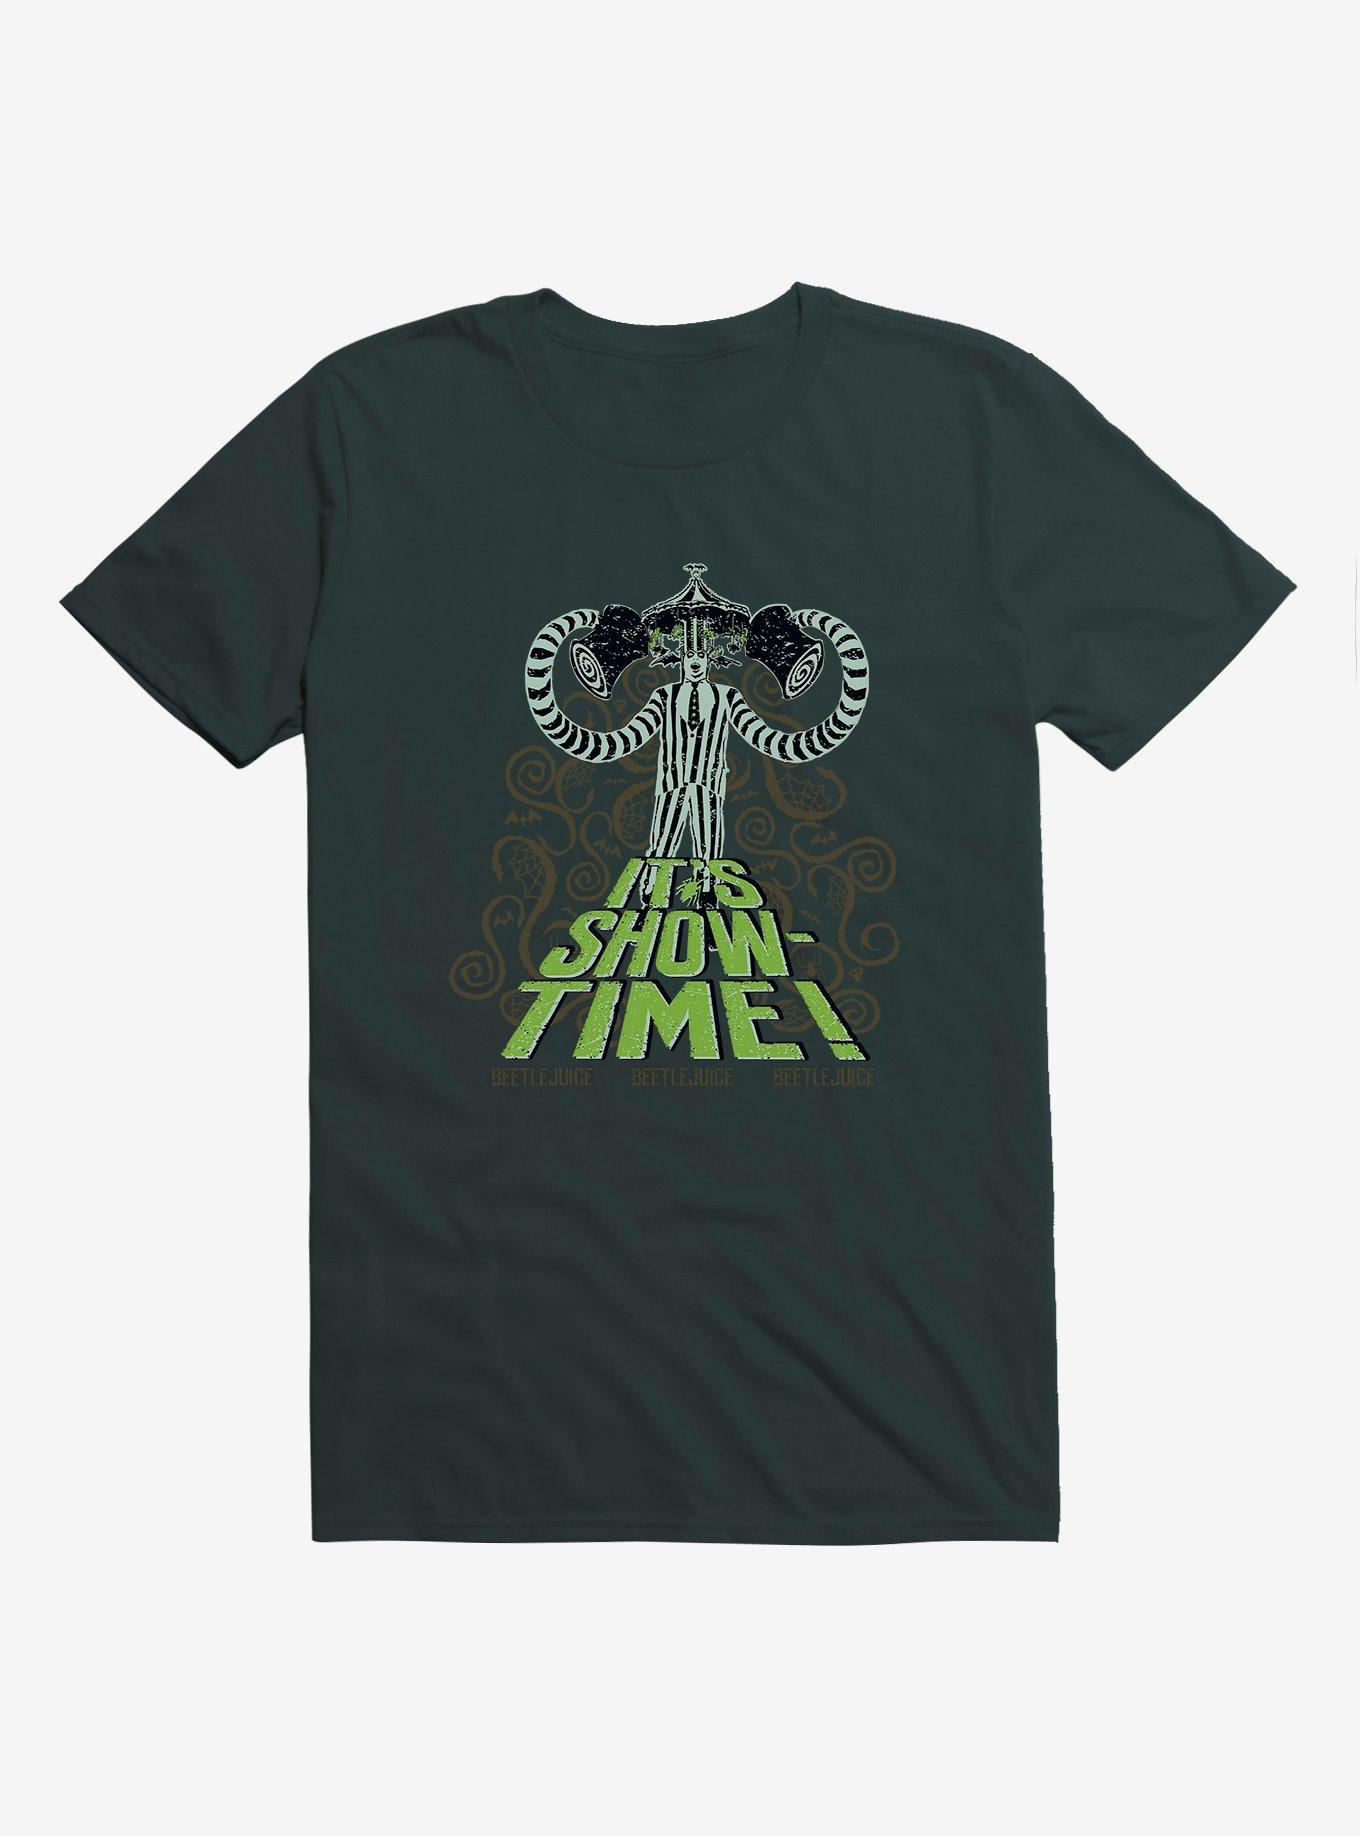 Beetlejuice It's Showtime T-Shirt, FOREST GREEN, hi-res